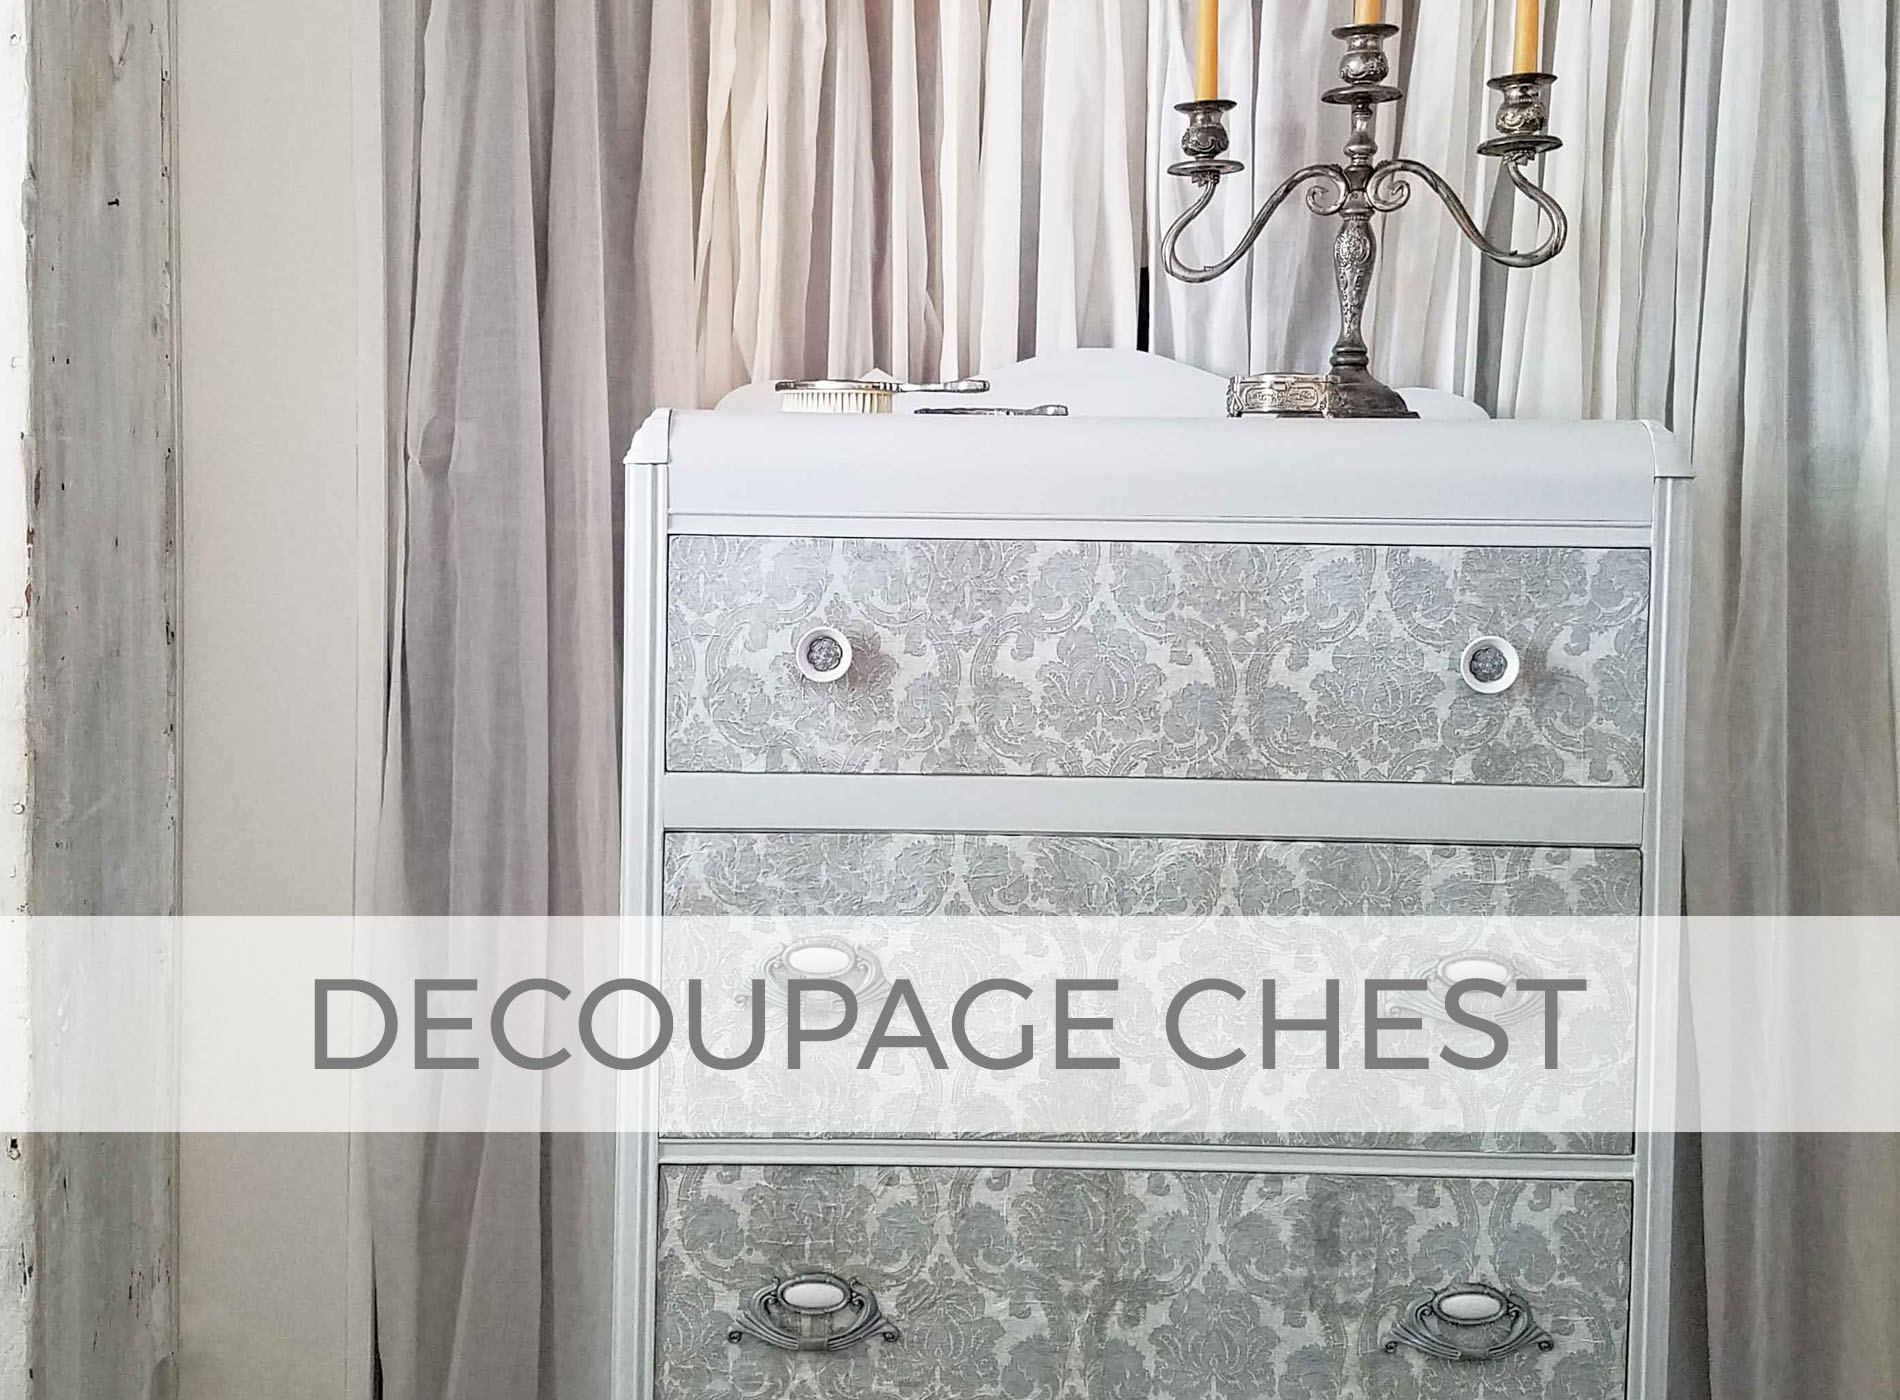 Decoupaged Art Deco Chest of Drawers by Larissa of Prodigal Pieces | prodigalpieces.com